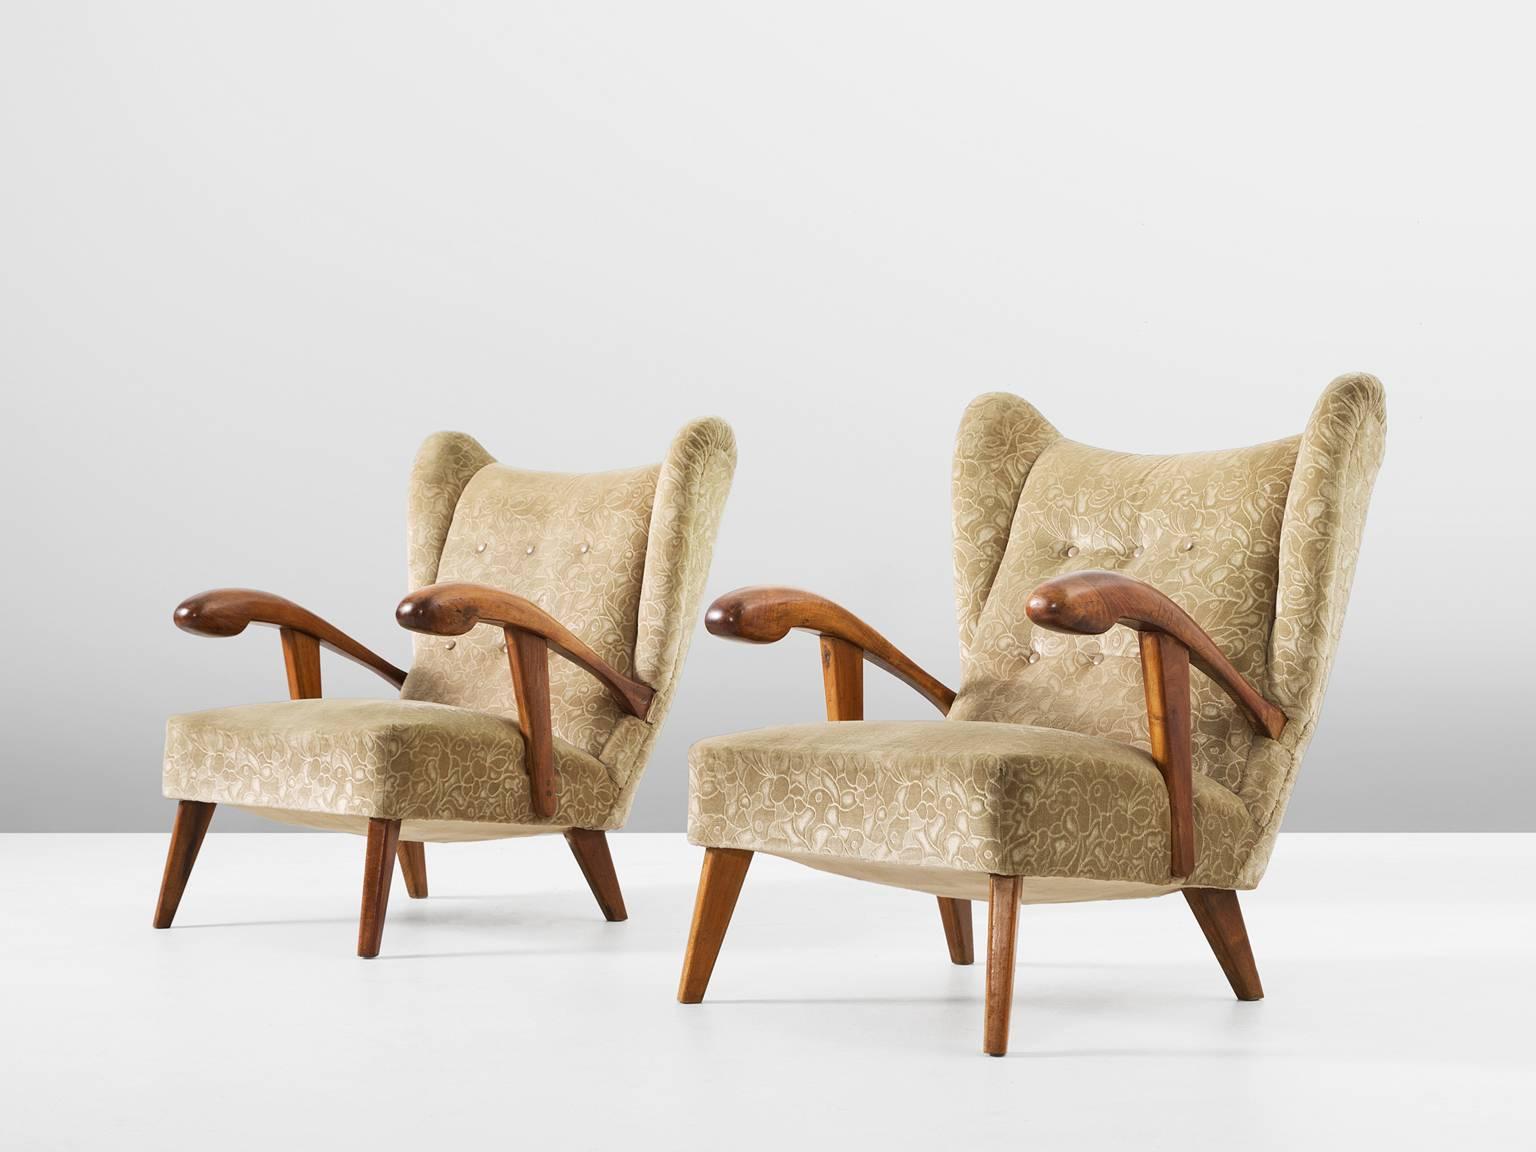 Set of two lounge chairs, in walnut and fabric, Czech Republic, 1950s. 

Elegant pair of two wingback chairs with solid walnut frame. These chairs show beautiful lines and curves. Upholstered in crème colored velvet with floral pattern. The grain